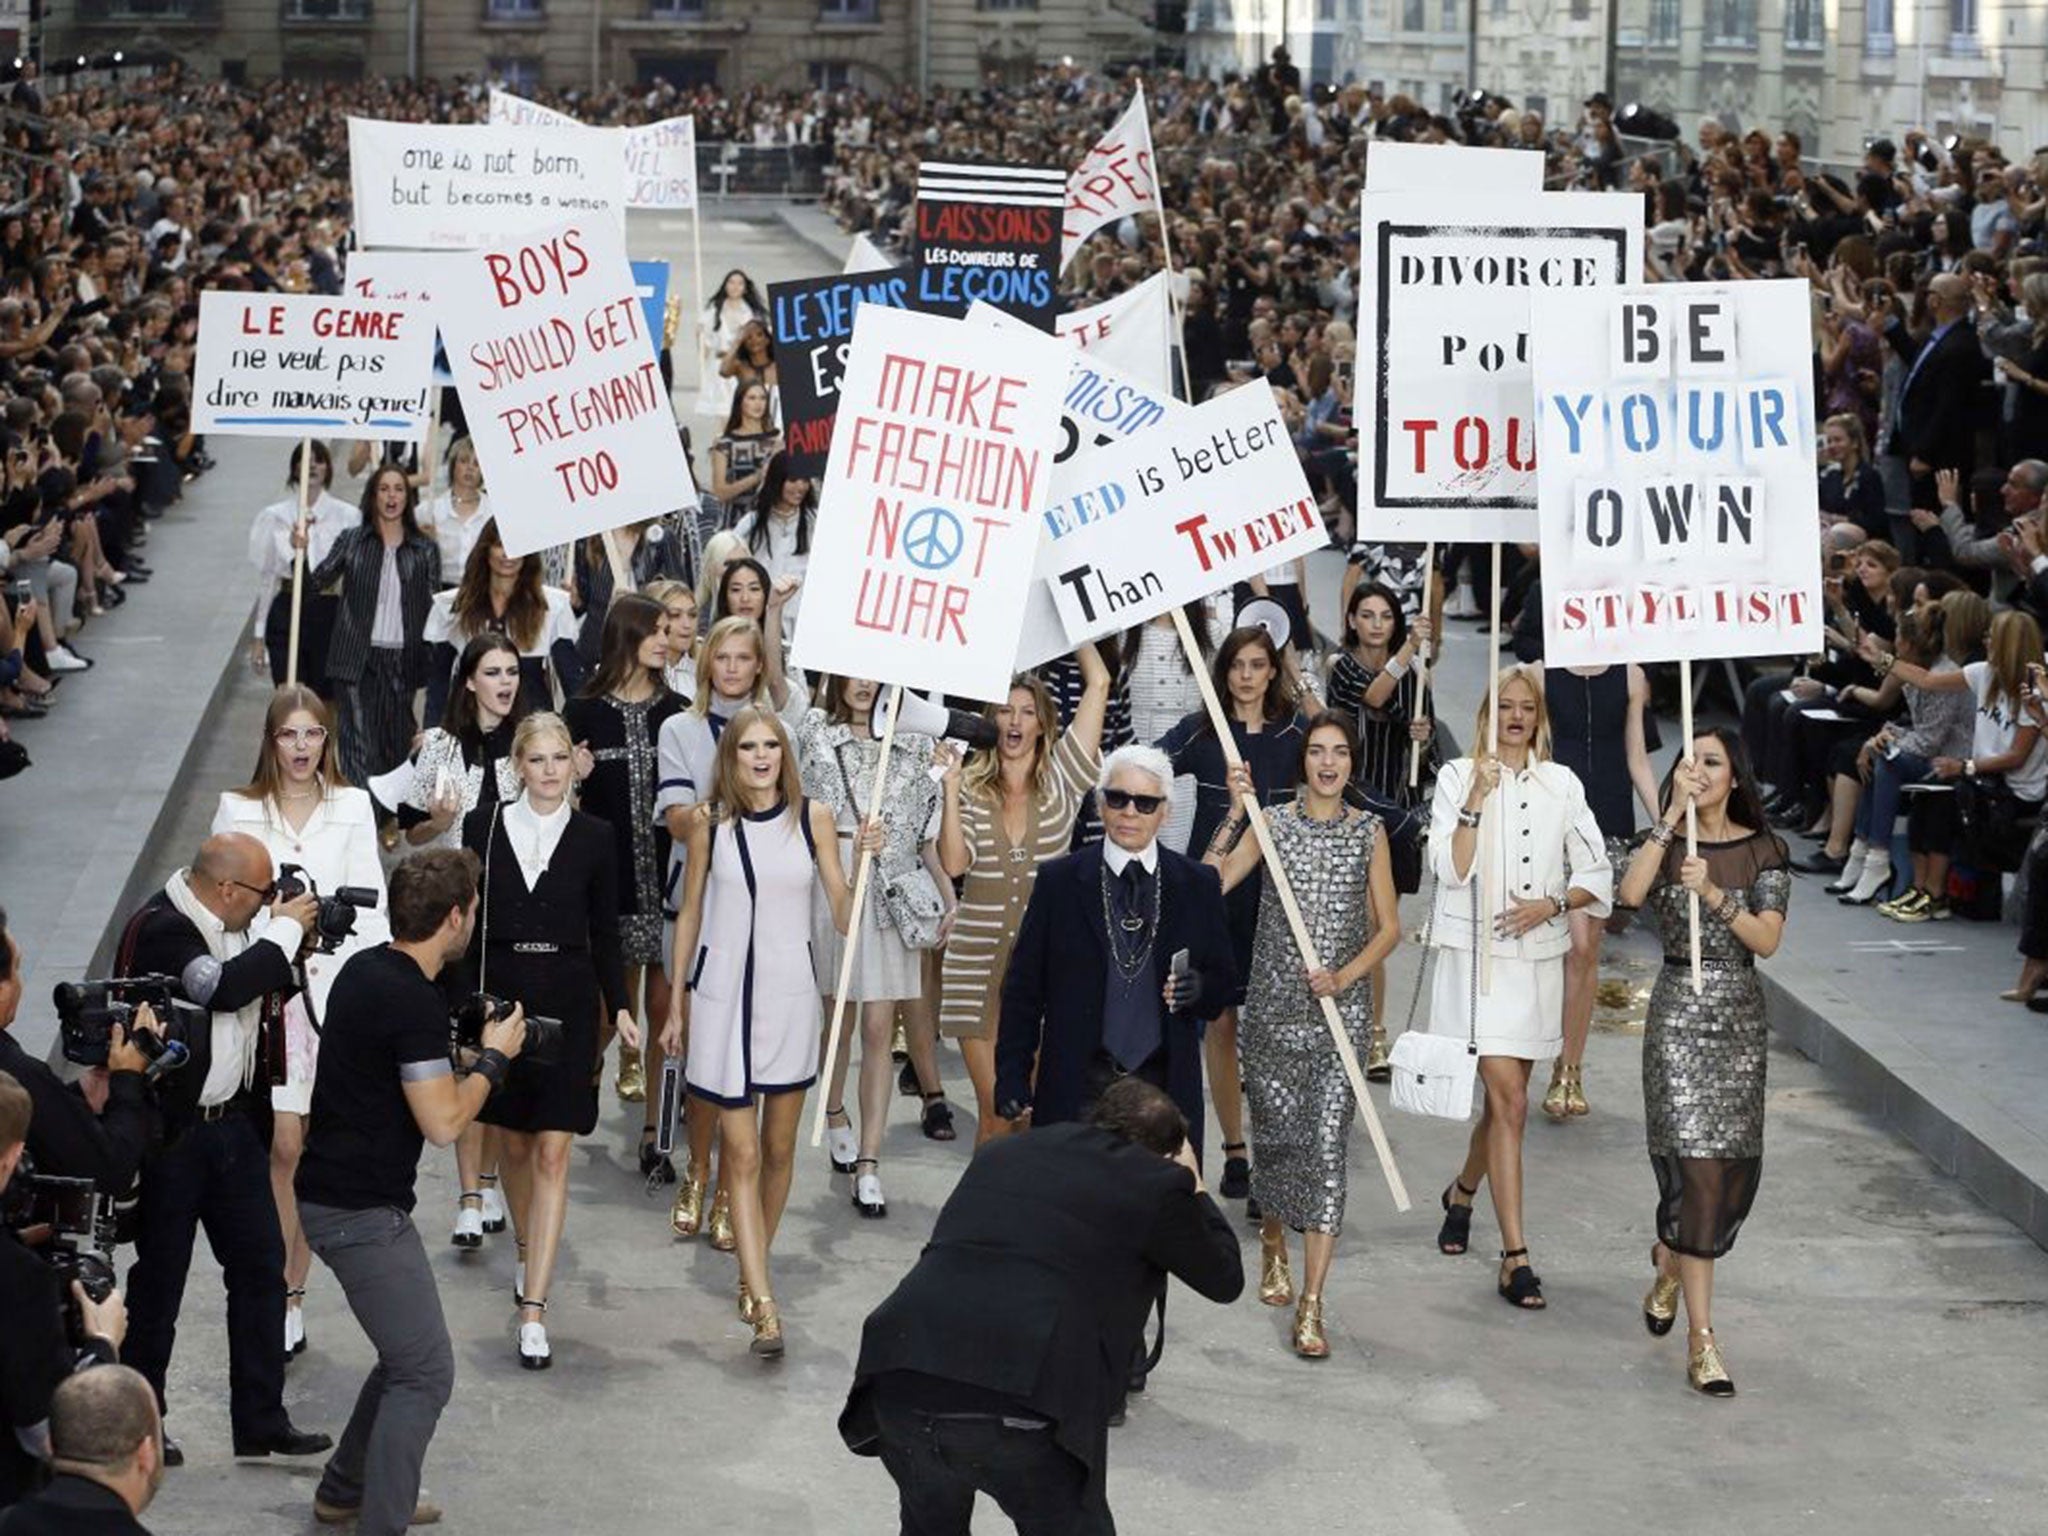 Karl Lagerfeld and Brazilian model Gisele Bundchen lead the models the fashion riot at the finale of Chanel's show